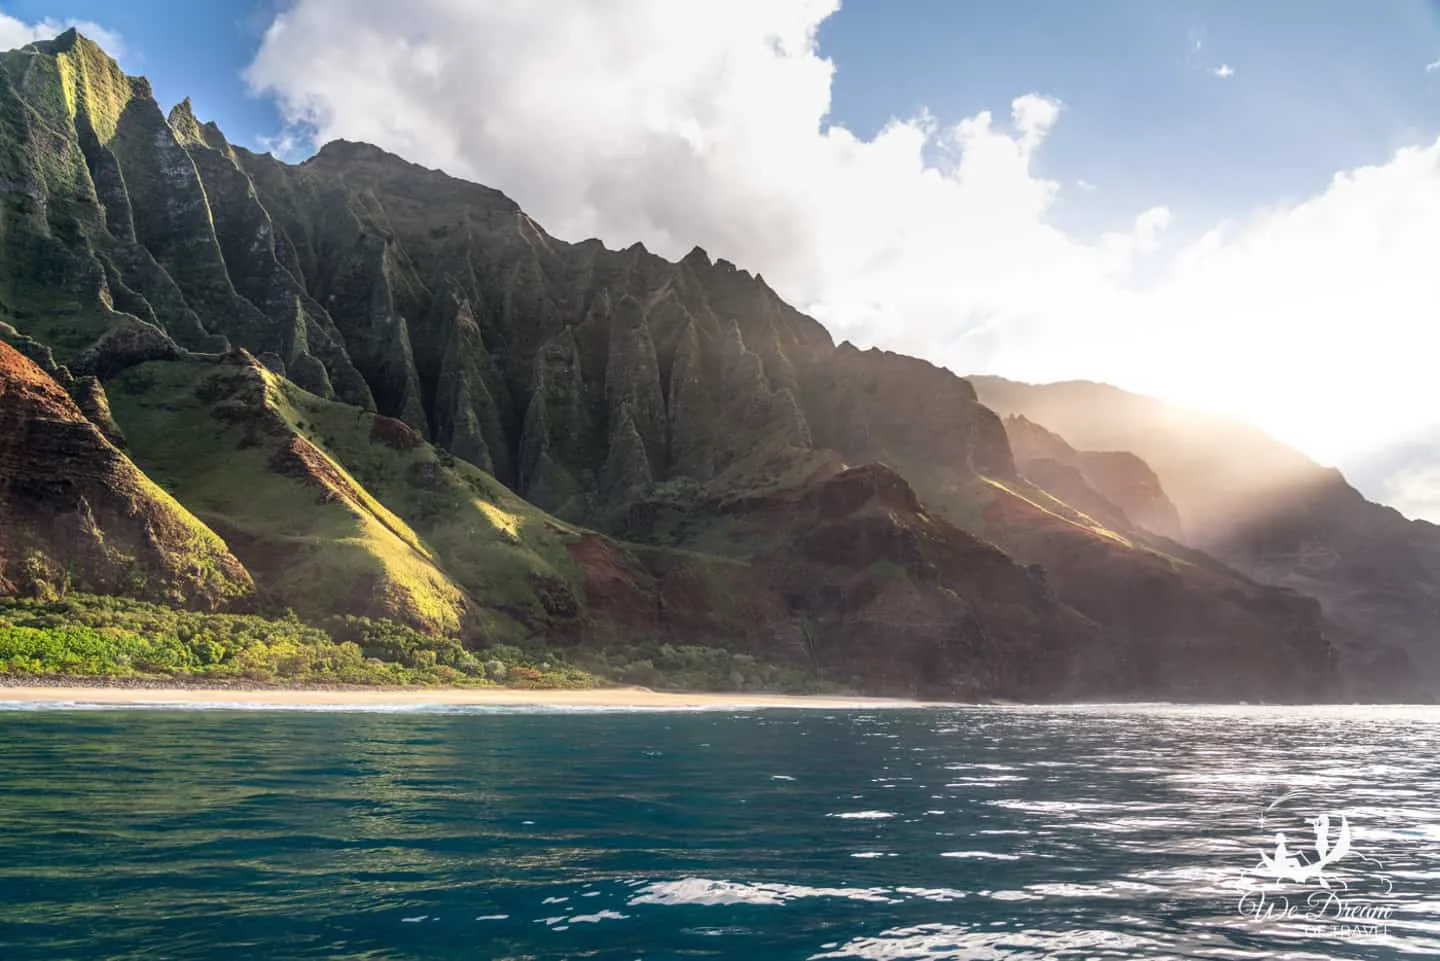 View of the Nepali Coast in Kauai from the water.